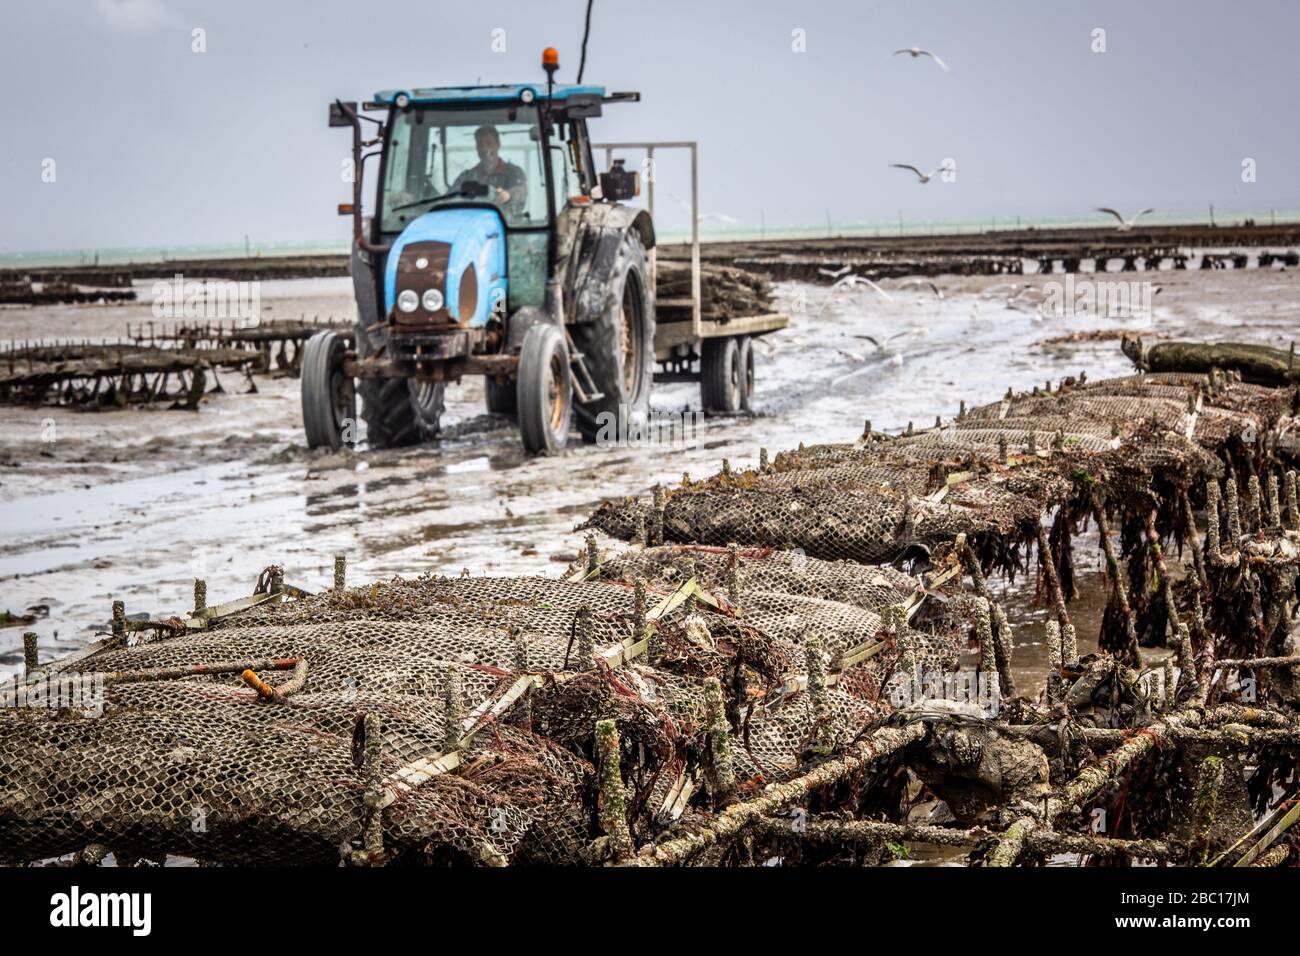 GATHERING IN THE OYSTER BAGS, OYSTER BEDS, CANCALE, ILLE-ET-VILAINE (35), FRANCE Stock Photo